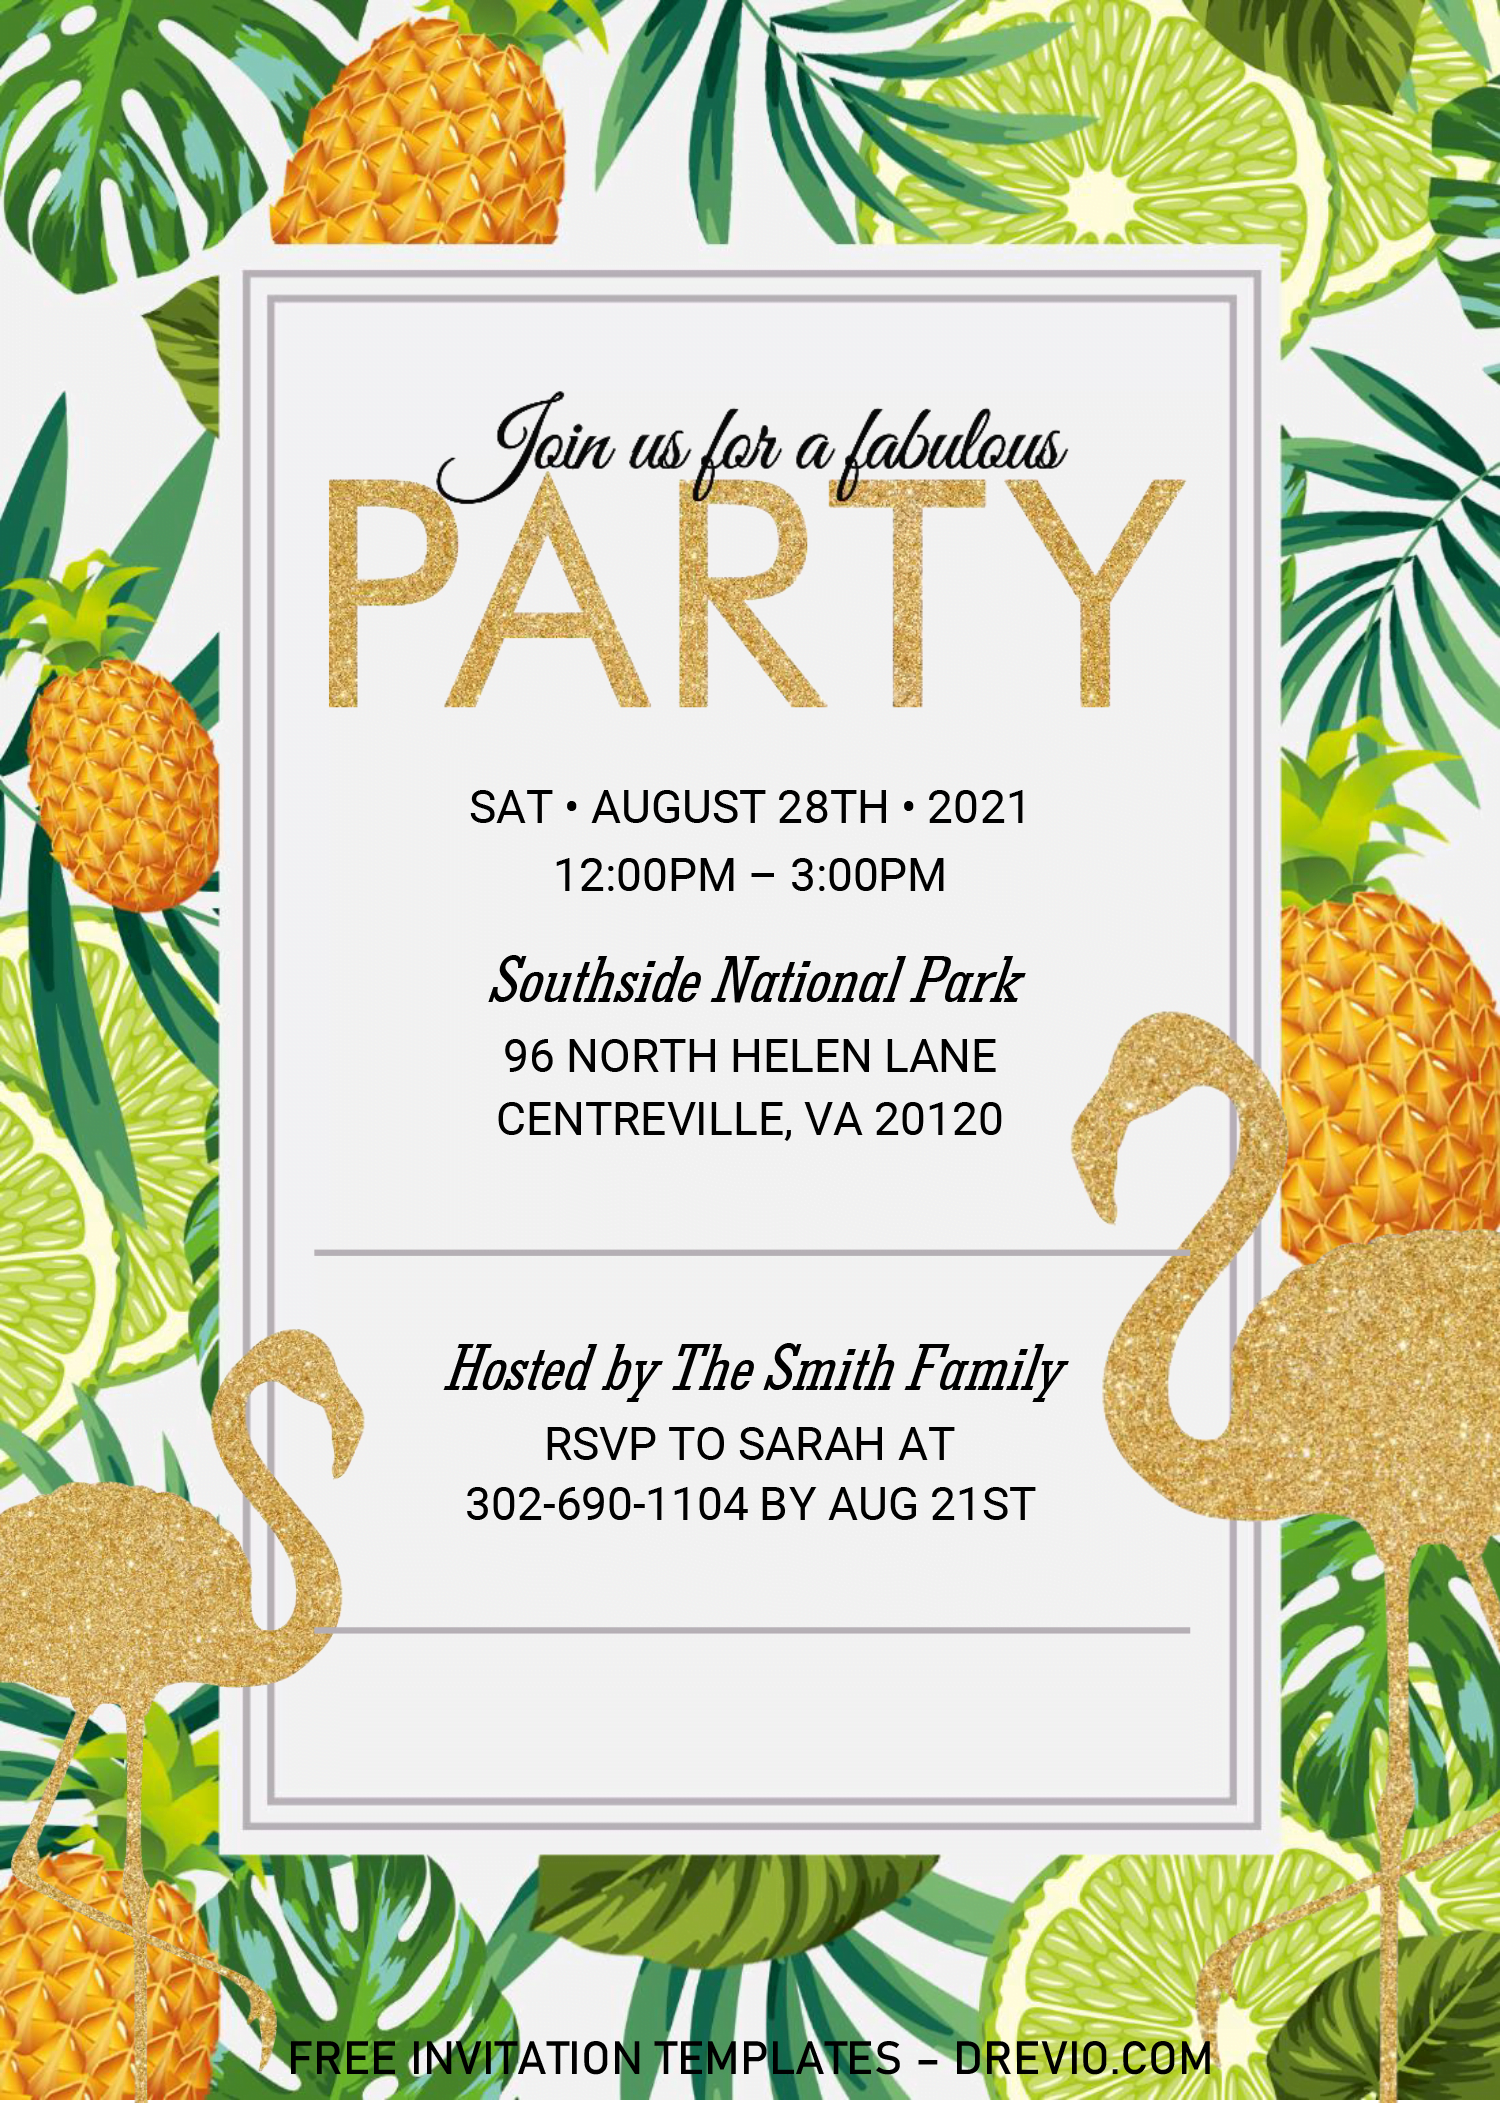 free templates for invitations in word